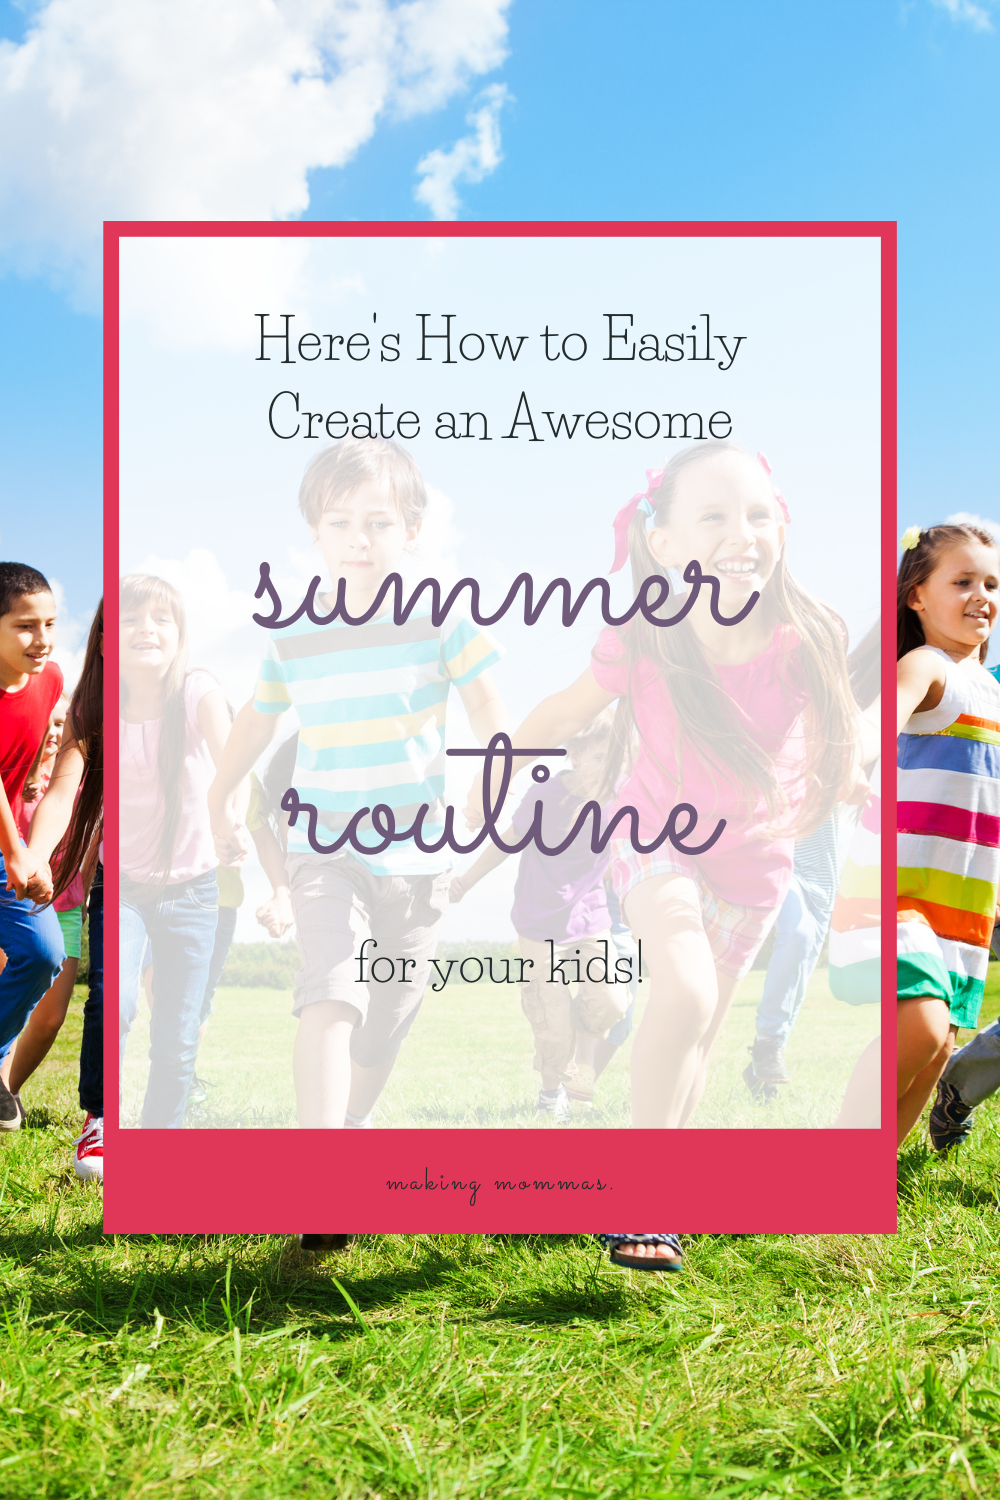 Here's How to Easily Create an Awesome Summer Routine for Your Kids